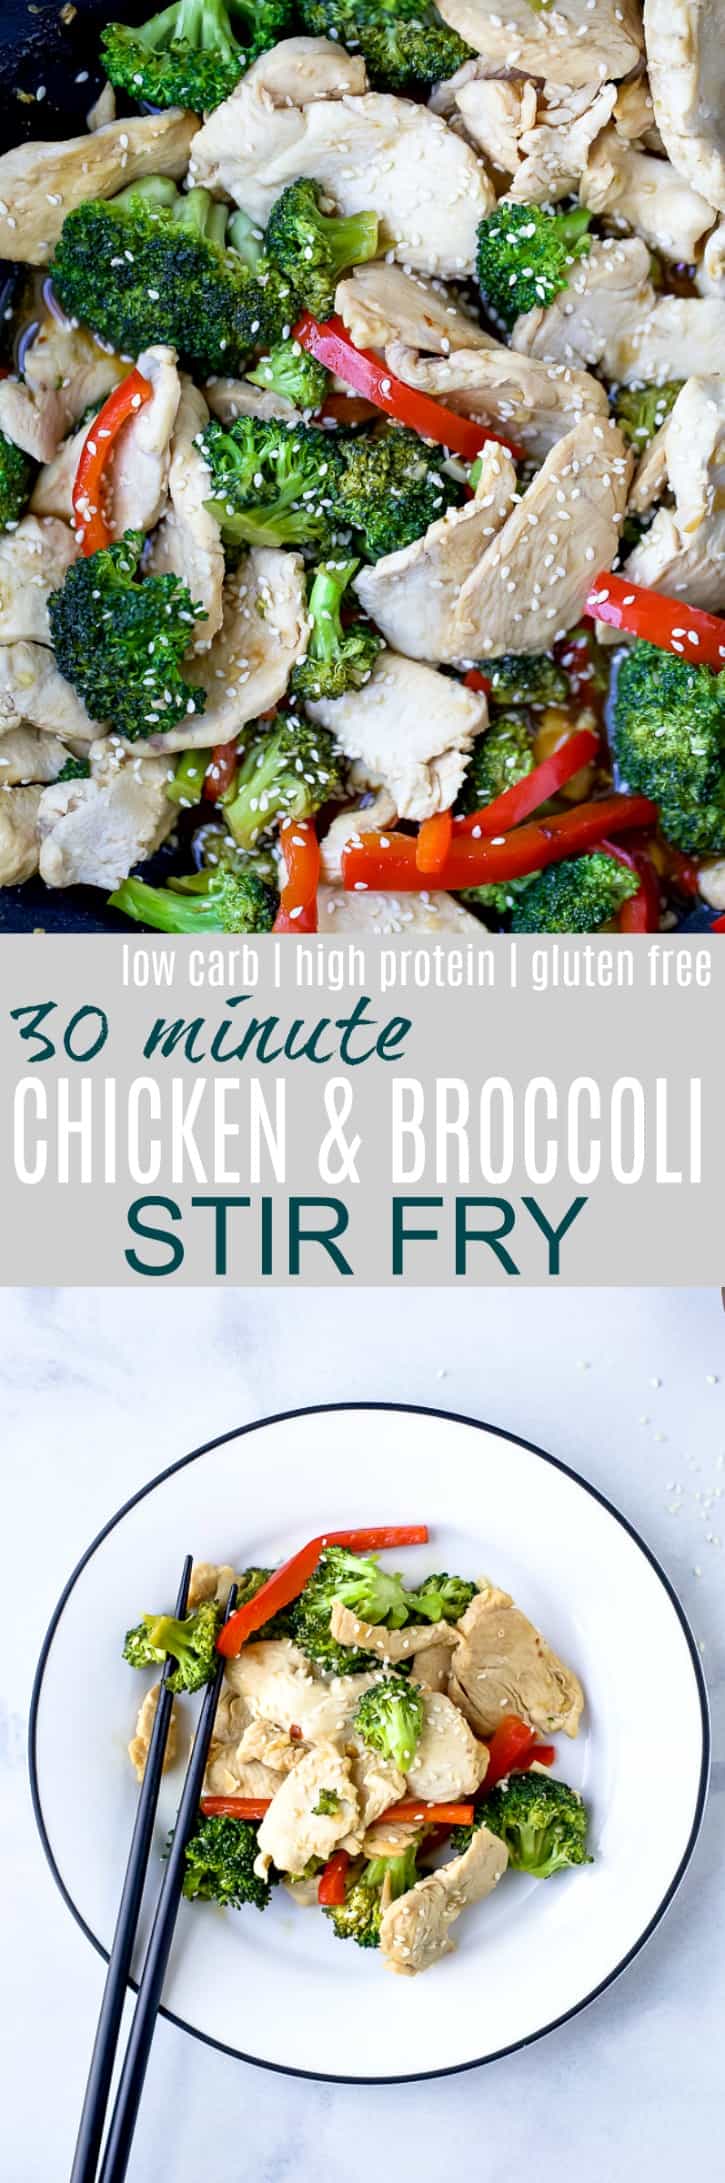 Collage for 30 Minute Chicken and Broccoli Stir Fry recipe